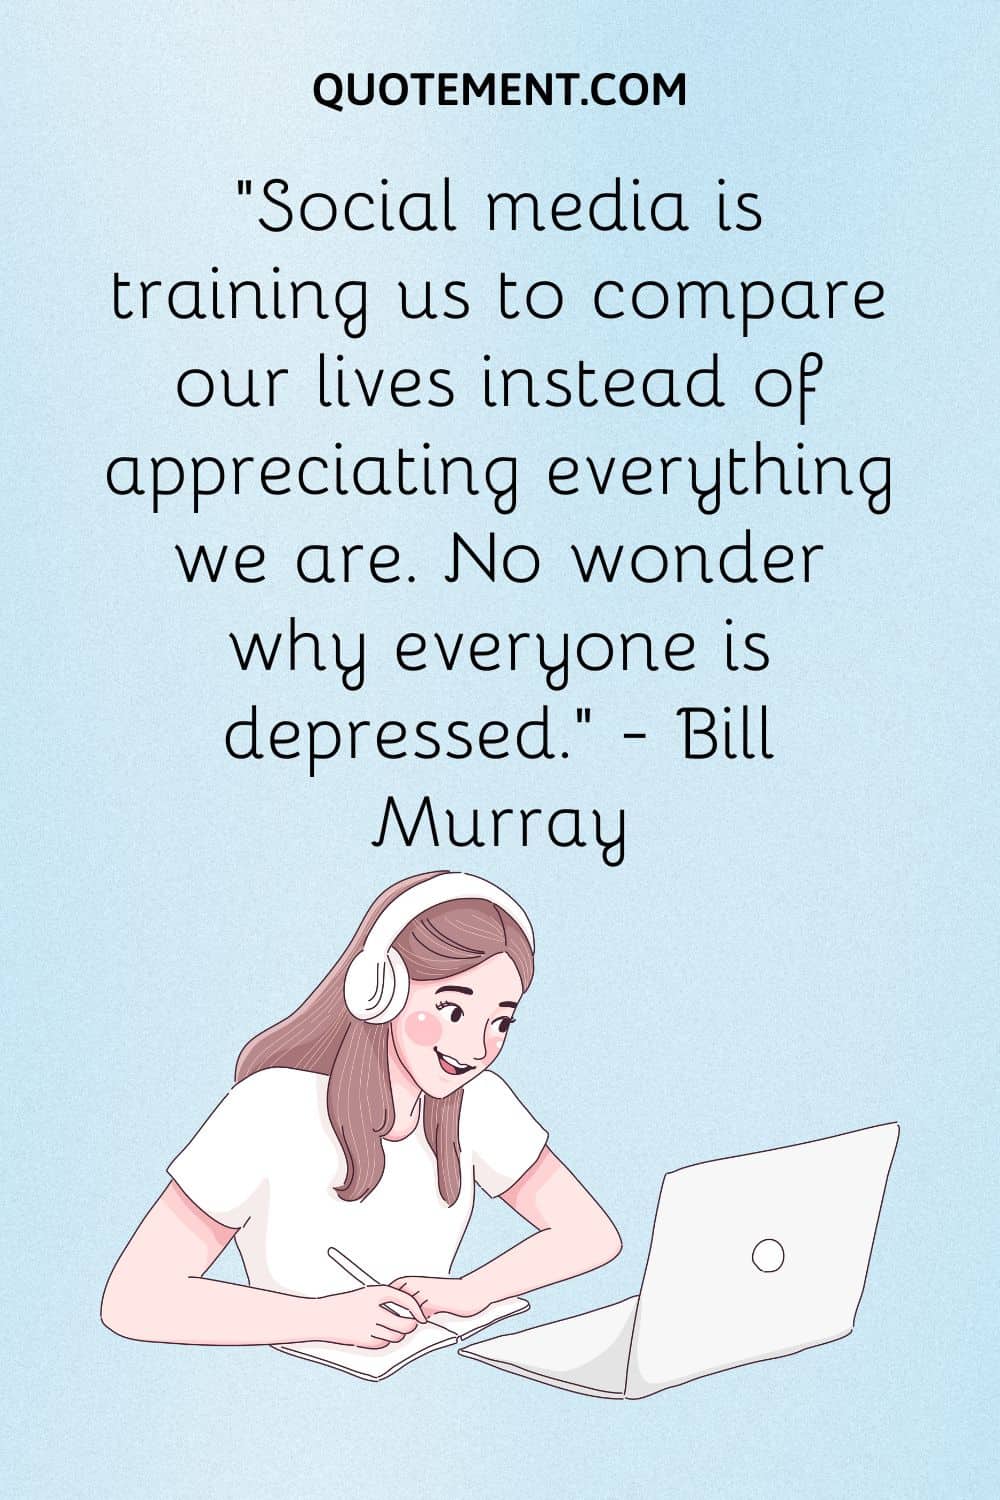 Social media is training us to compare our lives instead of appreciating everything we are